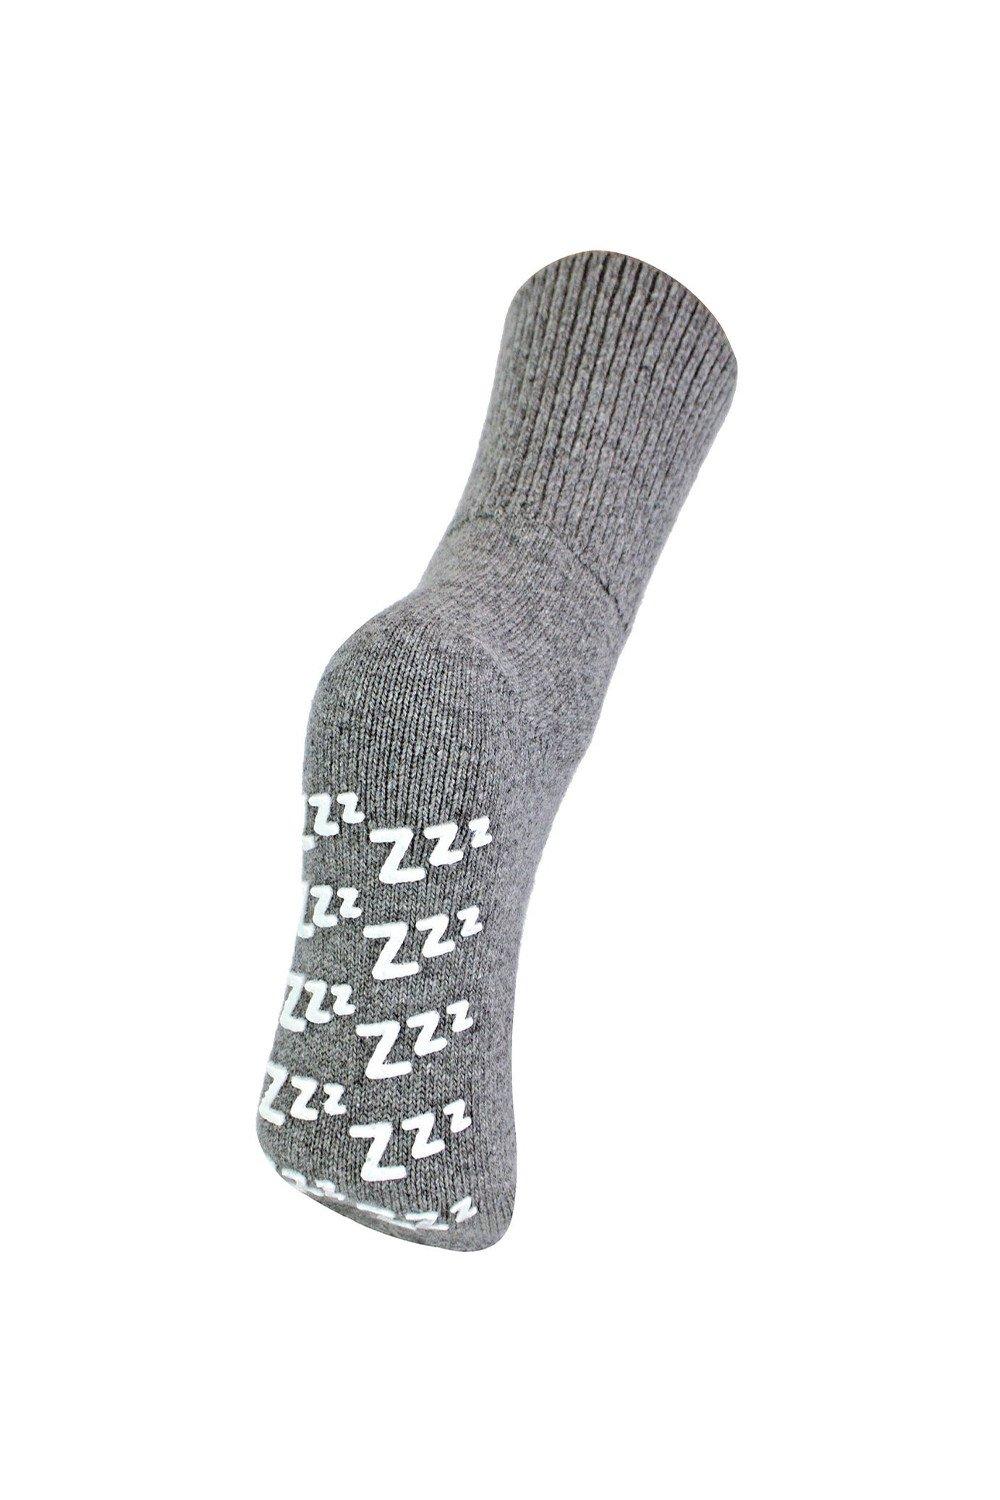 Warm Non Slip Cashmere Wool Blend Slipper Bed Socks with Zzz Grips